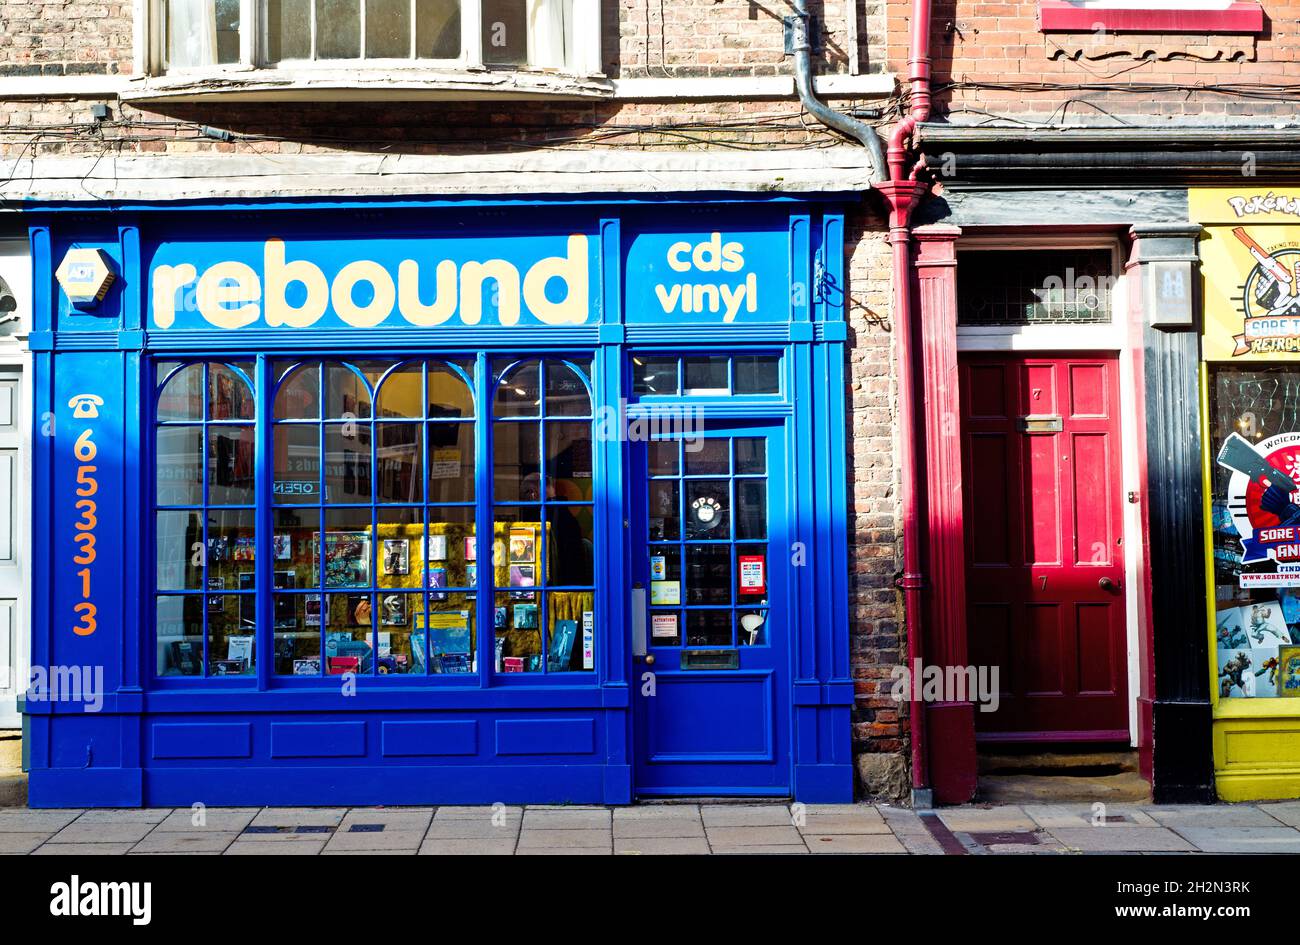 Rebound CDs and Vinyl shop, Gillygate, York, England Stock Photo